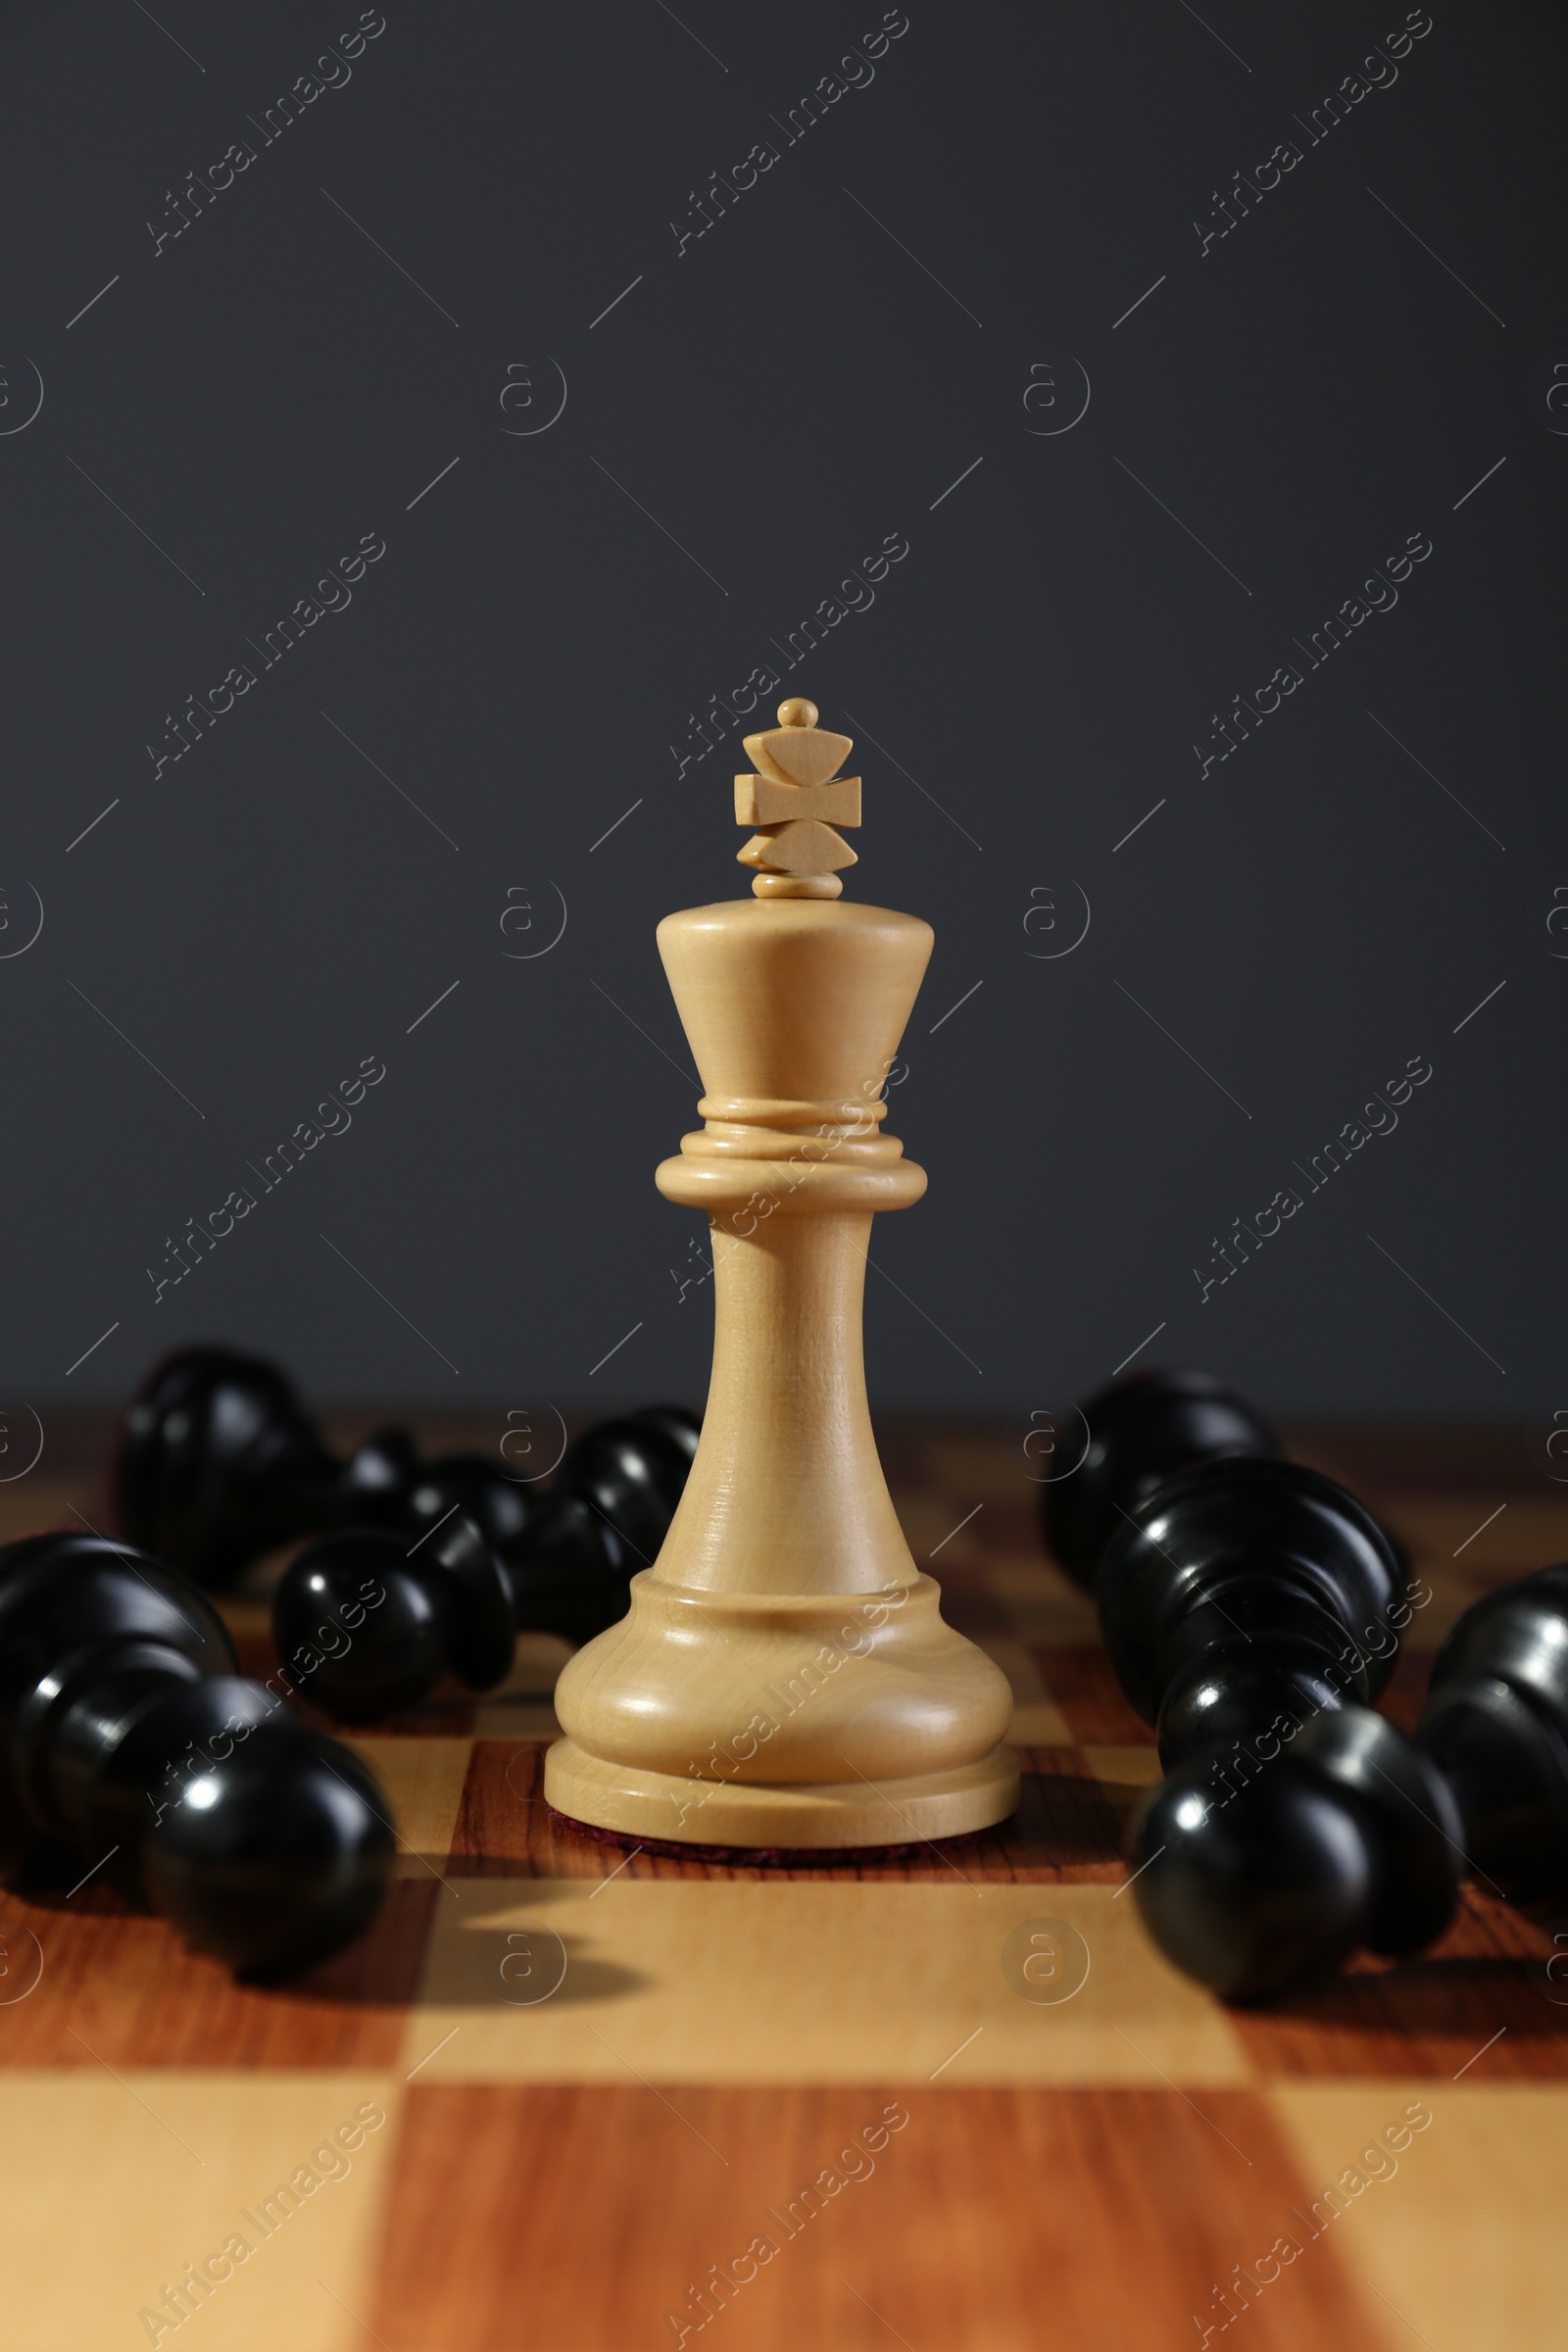 Photo of King among fallen black chess pieces on wooden board against dark background. Competition concept